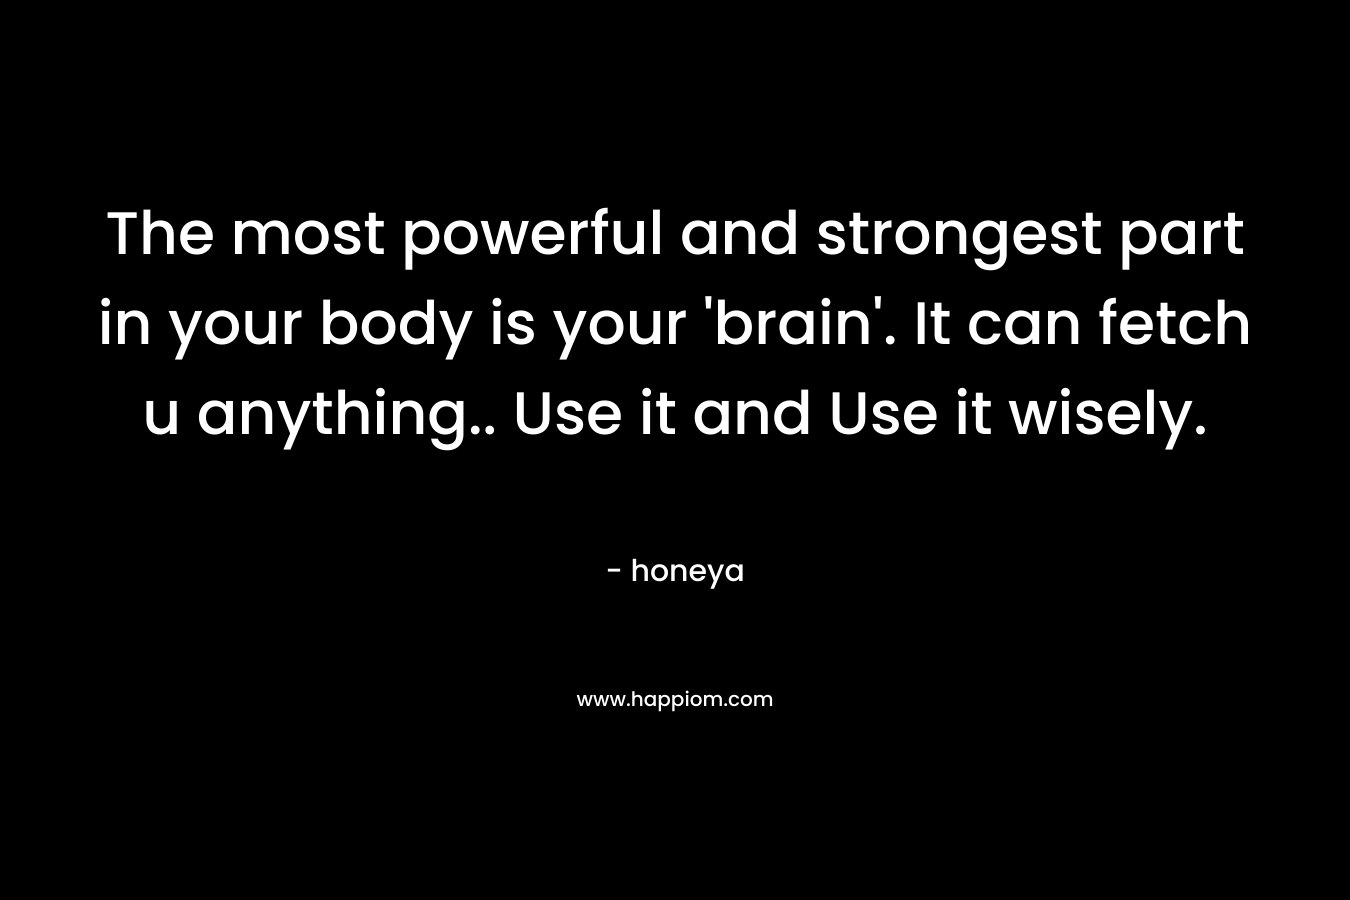 The most powerful and strongest part in your body is your 'brain'. It can fetch u anything.. Use it and Use it wisely.